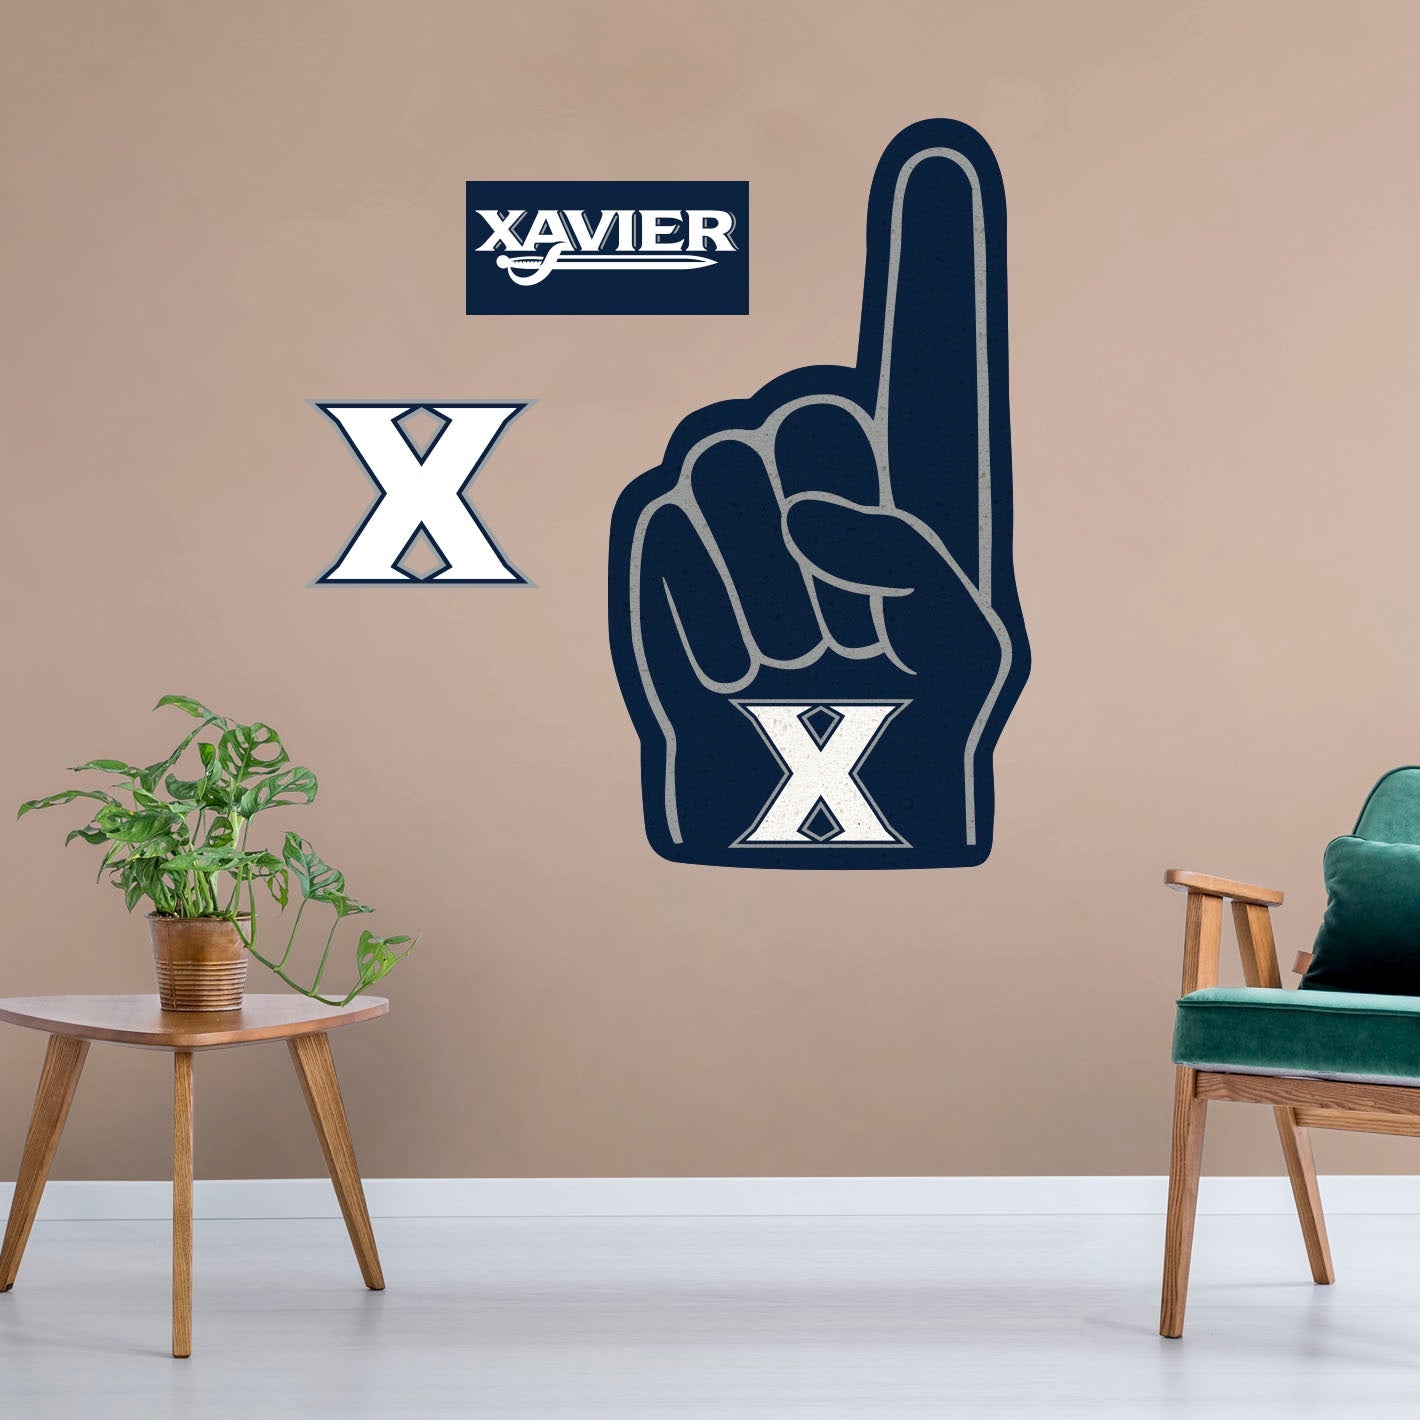 Xavier Musketeers: Foam Finger - Officially Licensed NCAA Removable Adhesive Decal